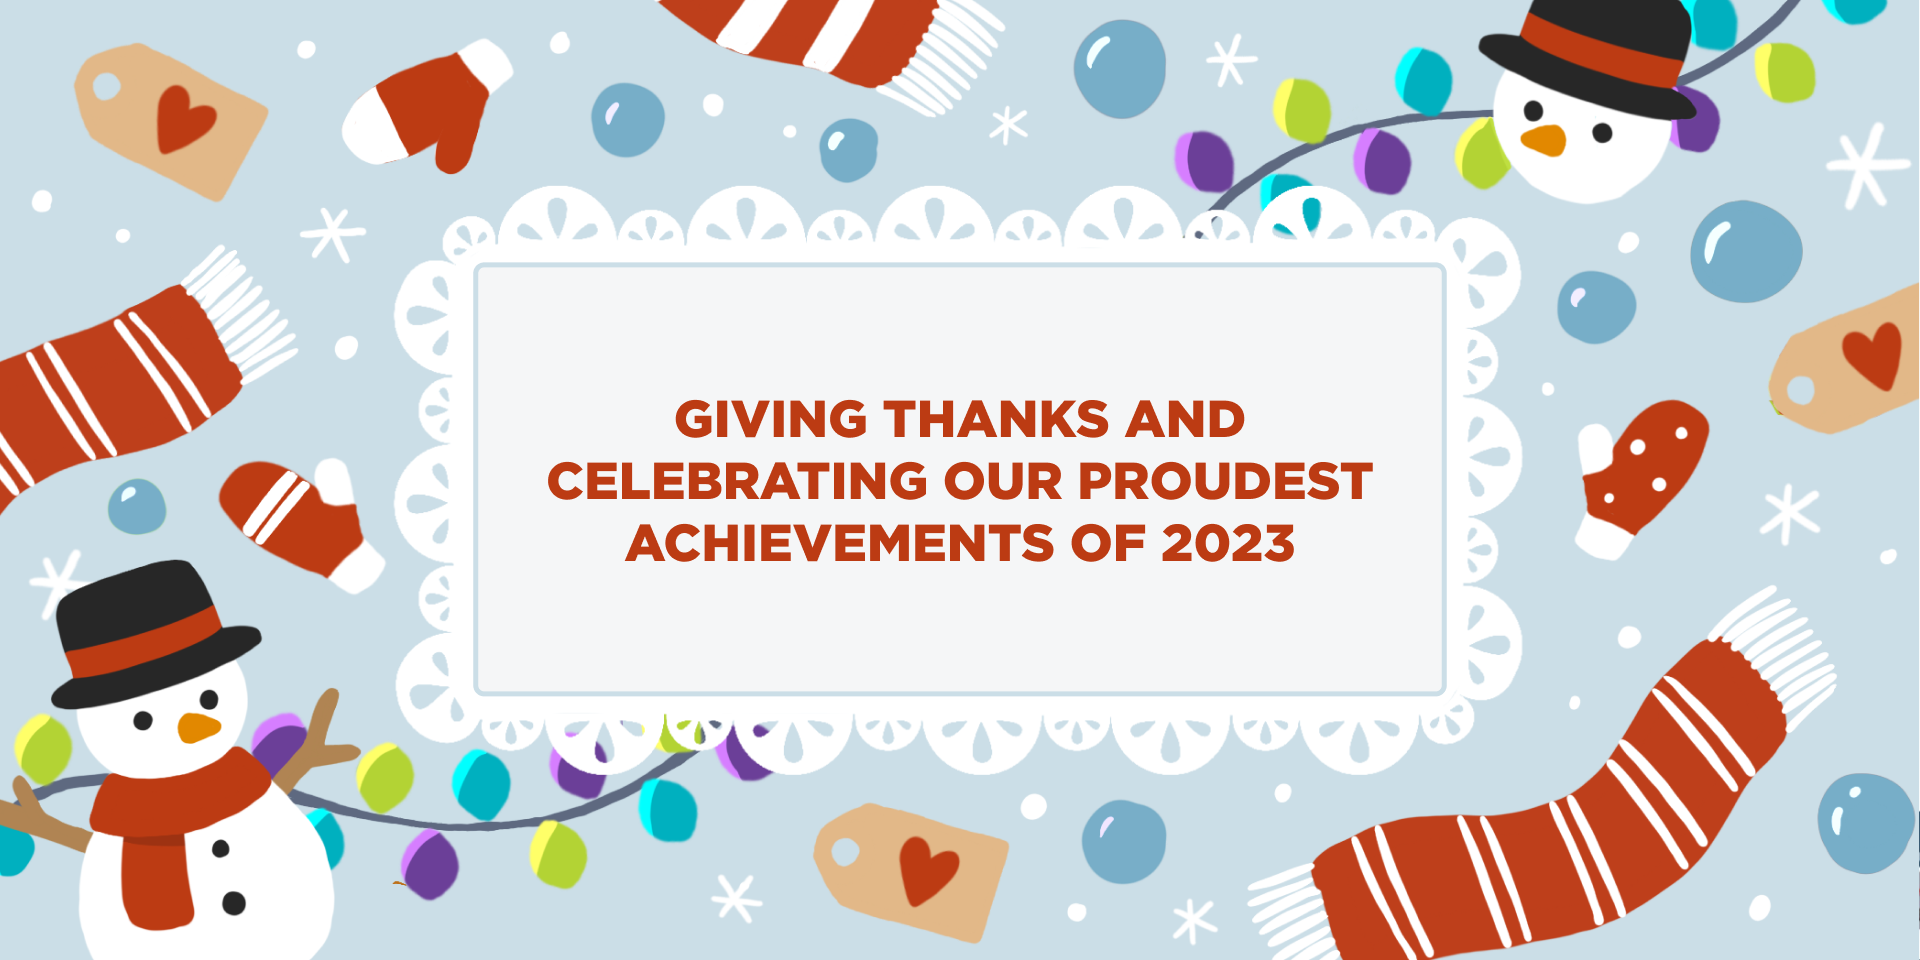 Graphic with images of snowmen, scarves, snowflakes and holiday lights with text that reads "Giving thanks and celebrating our proudest achievements of 2023"